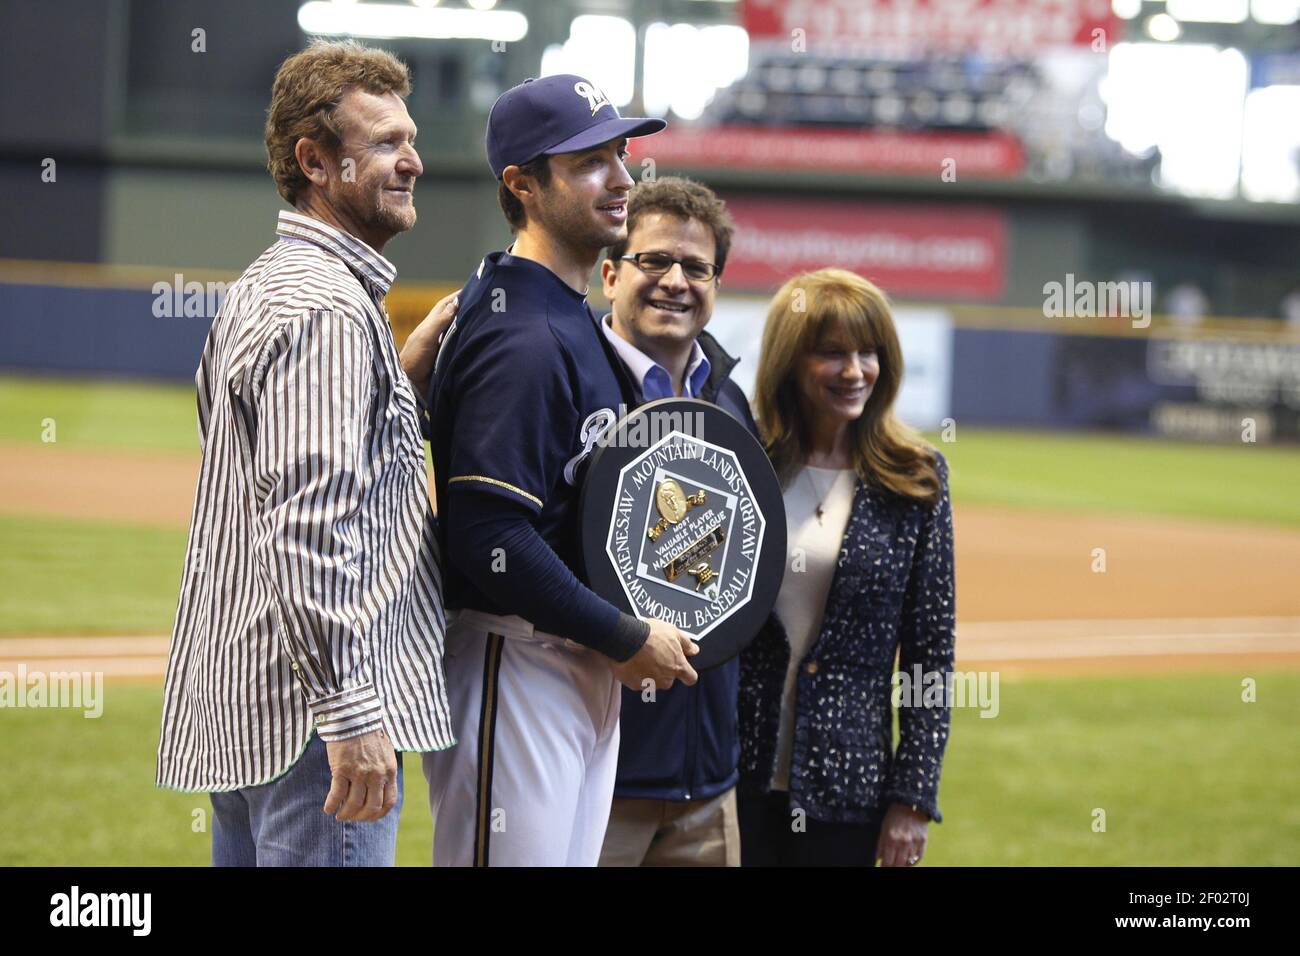 The Milwaukee Brewers' Ryan Braun is presented the National League